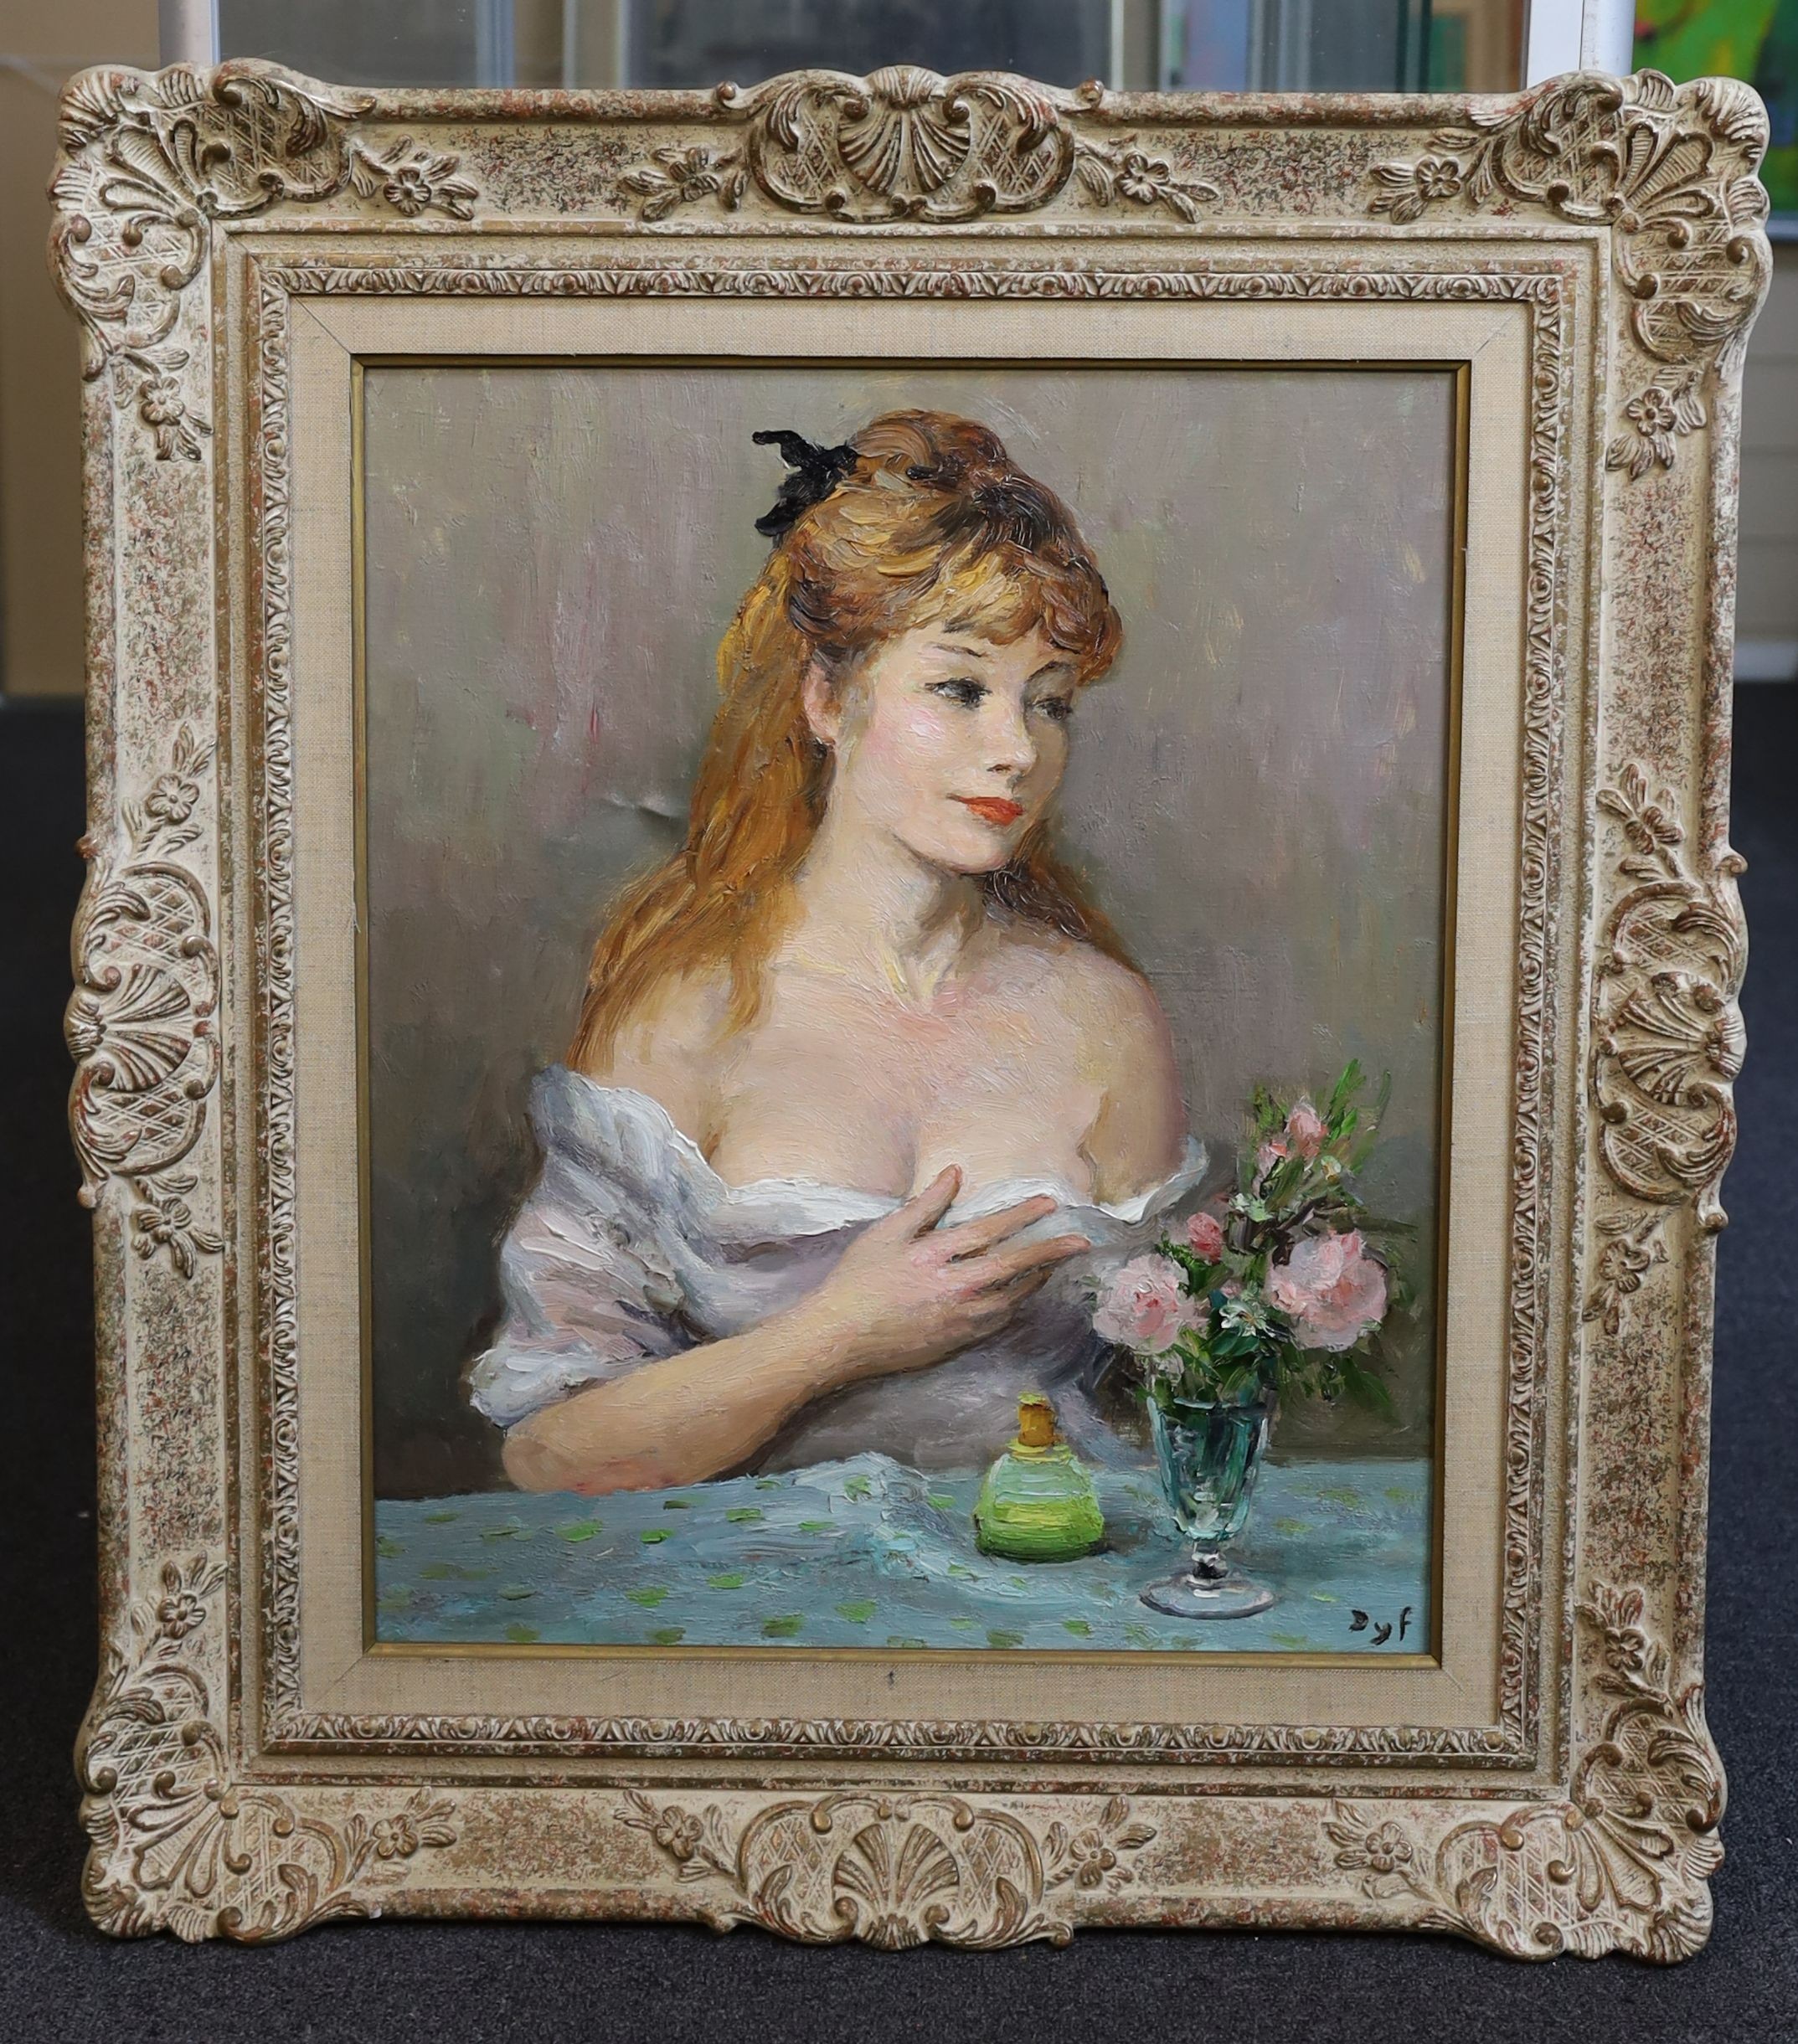 Marcel Dyf (French, 1899-1985), 'Claudine', oil on canvas, 54 x 44cm